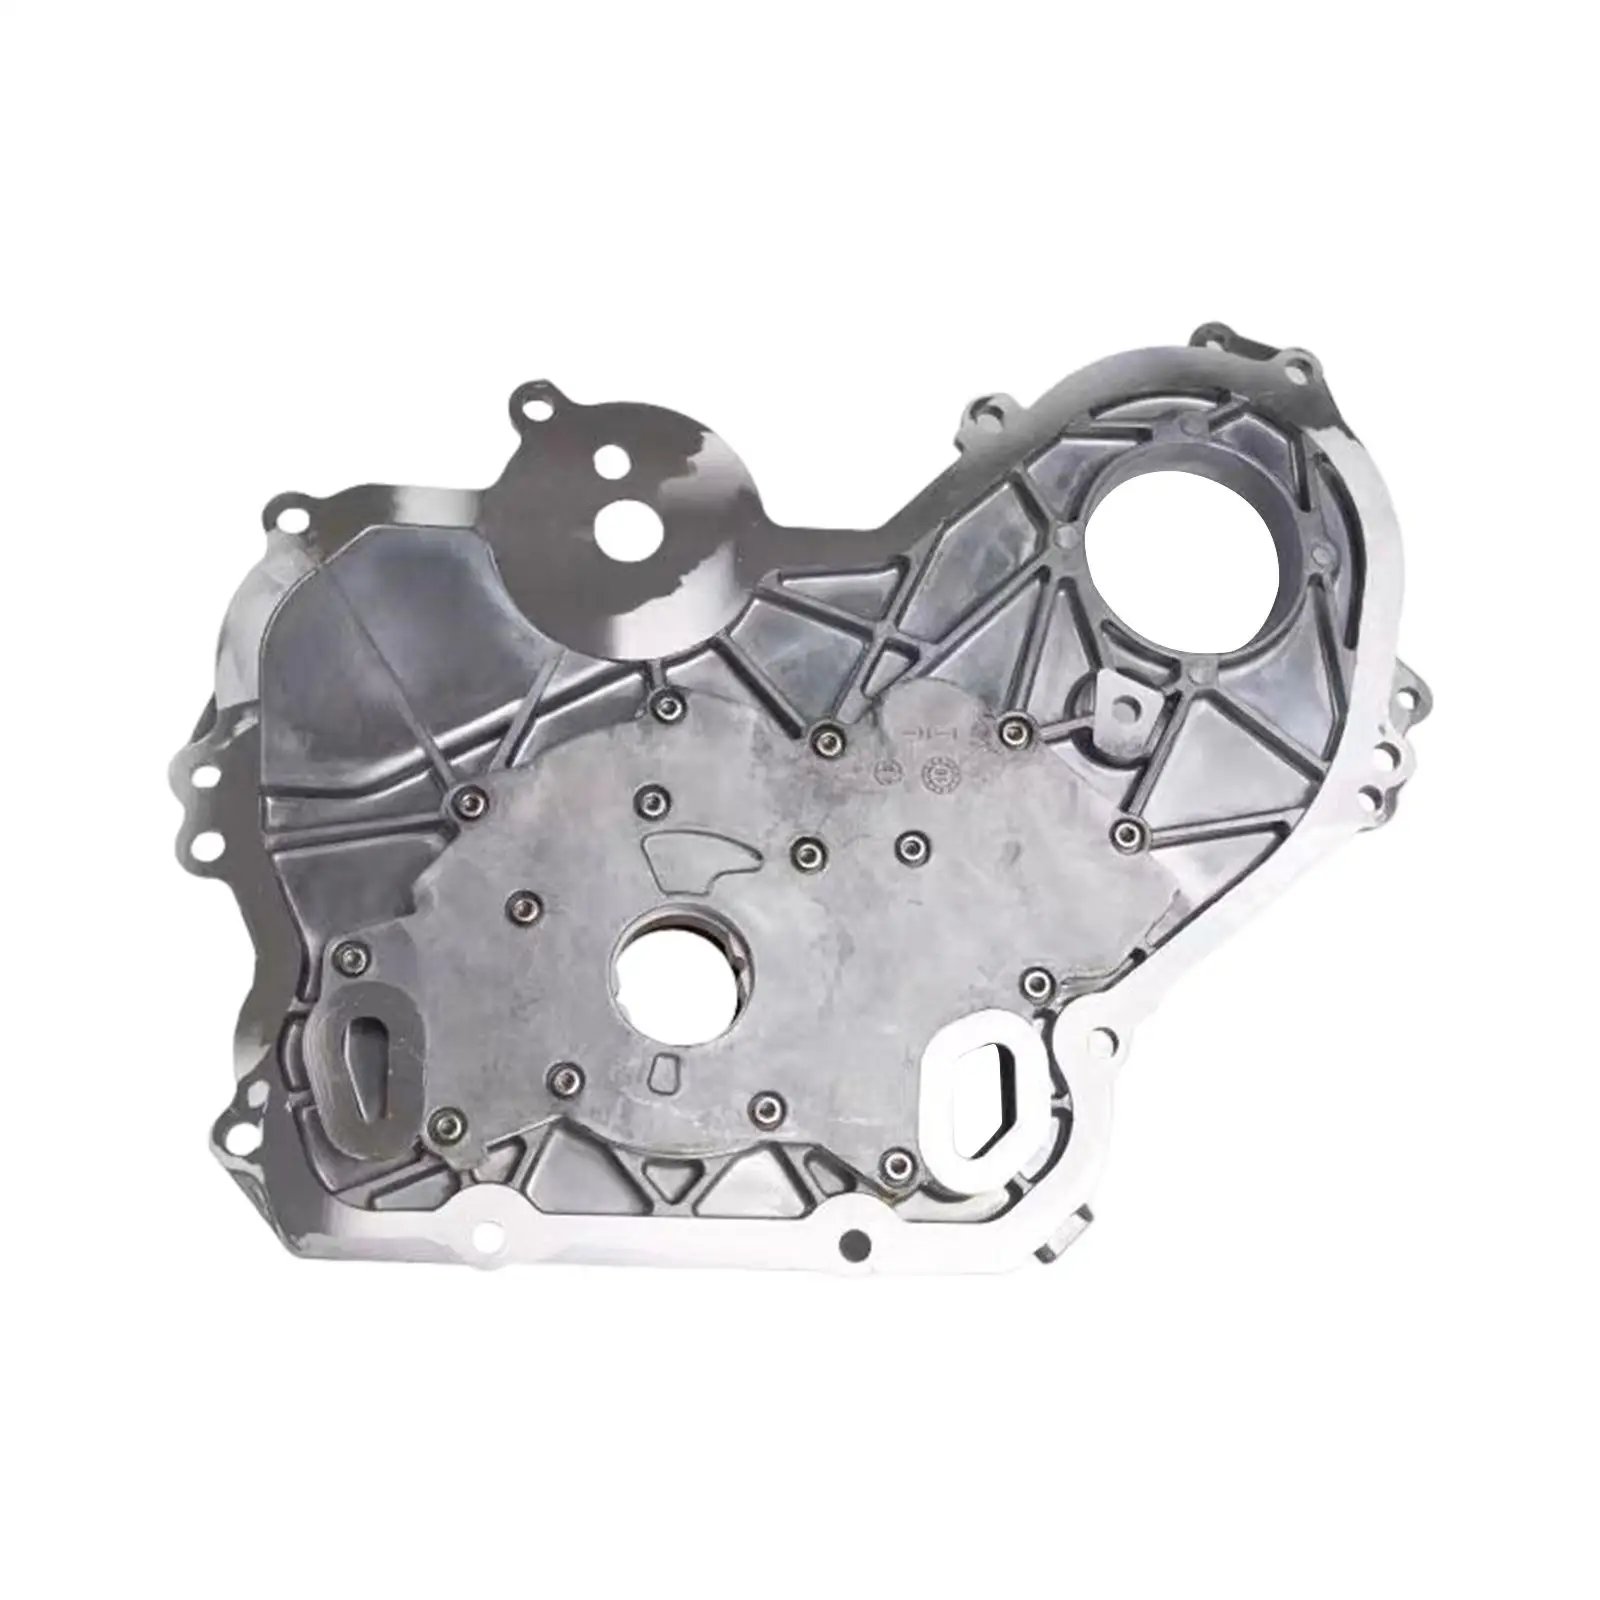 Timing Cover with Oil Pump Repair Parts 12606580 Replacement 90537914 12637040 for Chevrolet HHR Impala Malibu Accessories